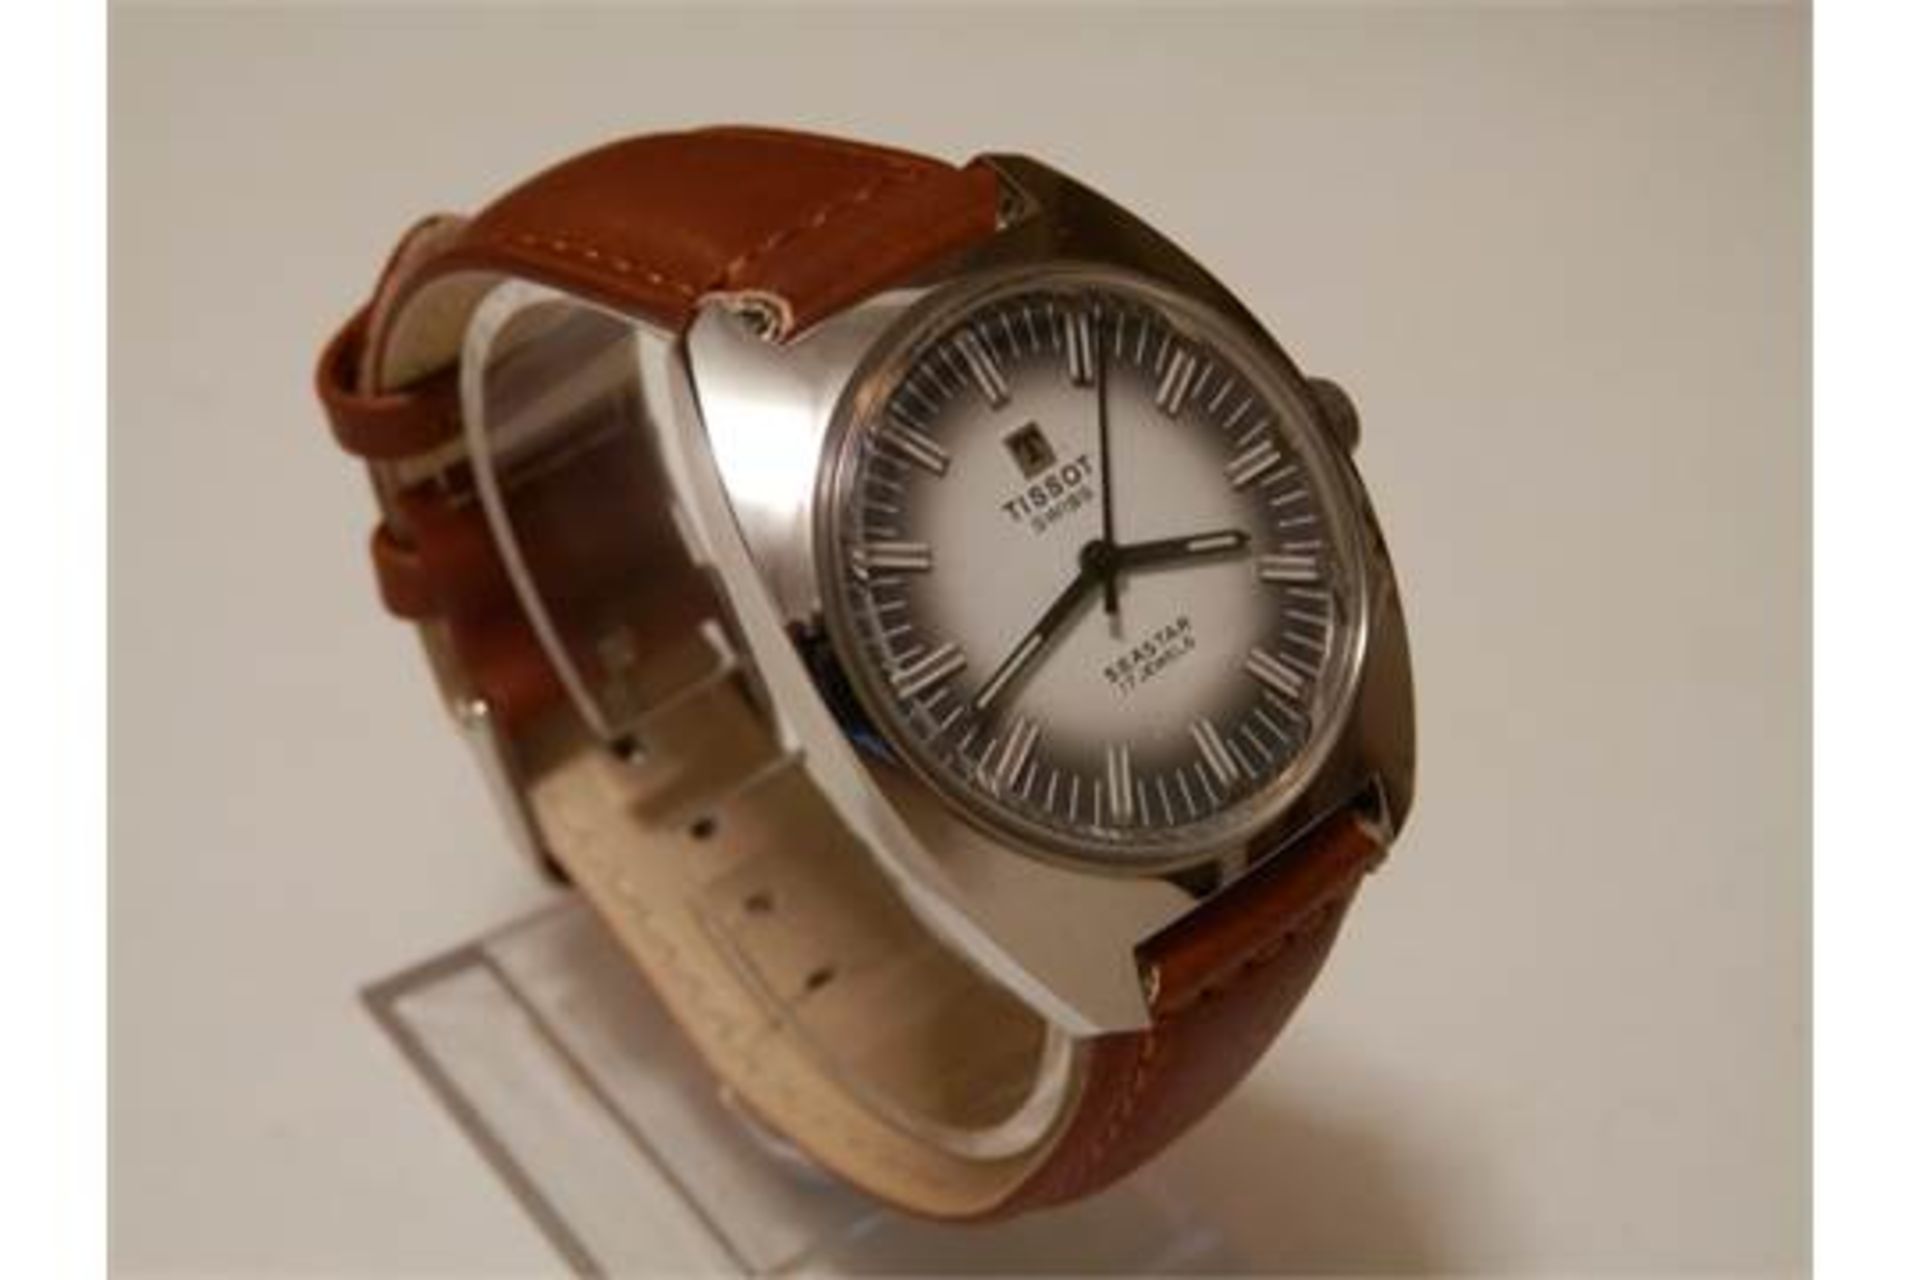 SUPERB GENTS TISSOT SEASTAR, POSSIBLY NEW/OLD STOCK 1970S 17 JEWEL SWISS WATCH (1 of 3 available)